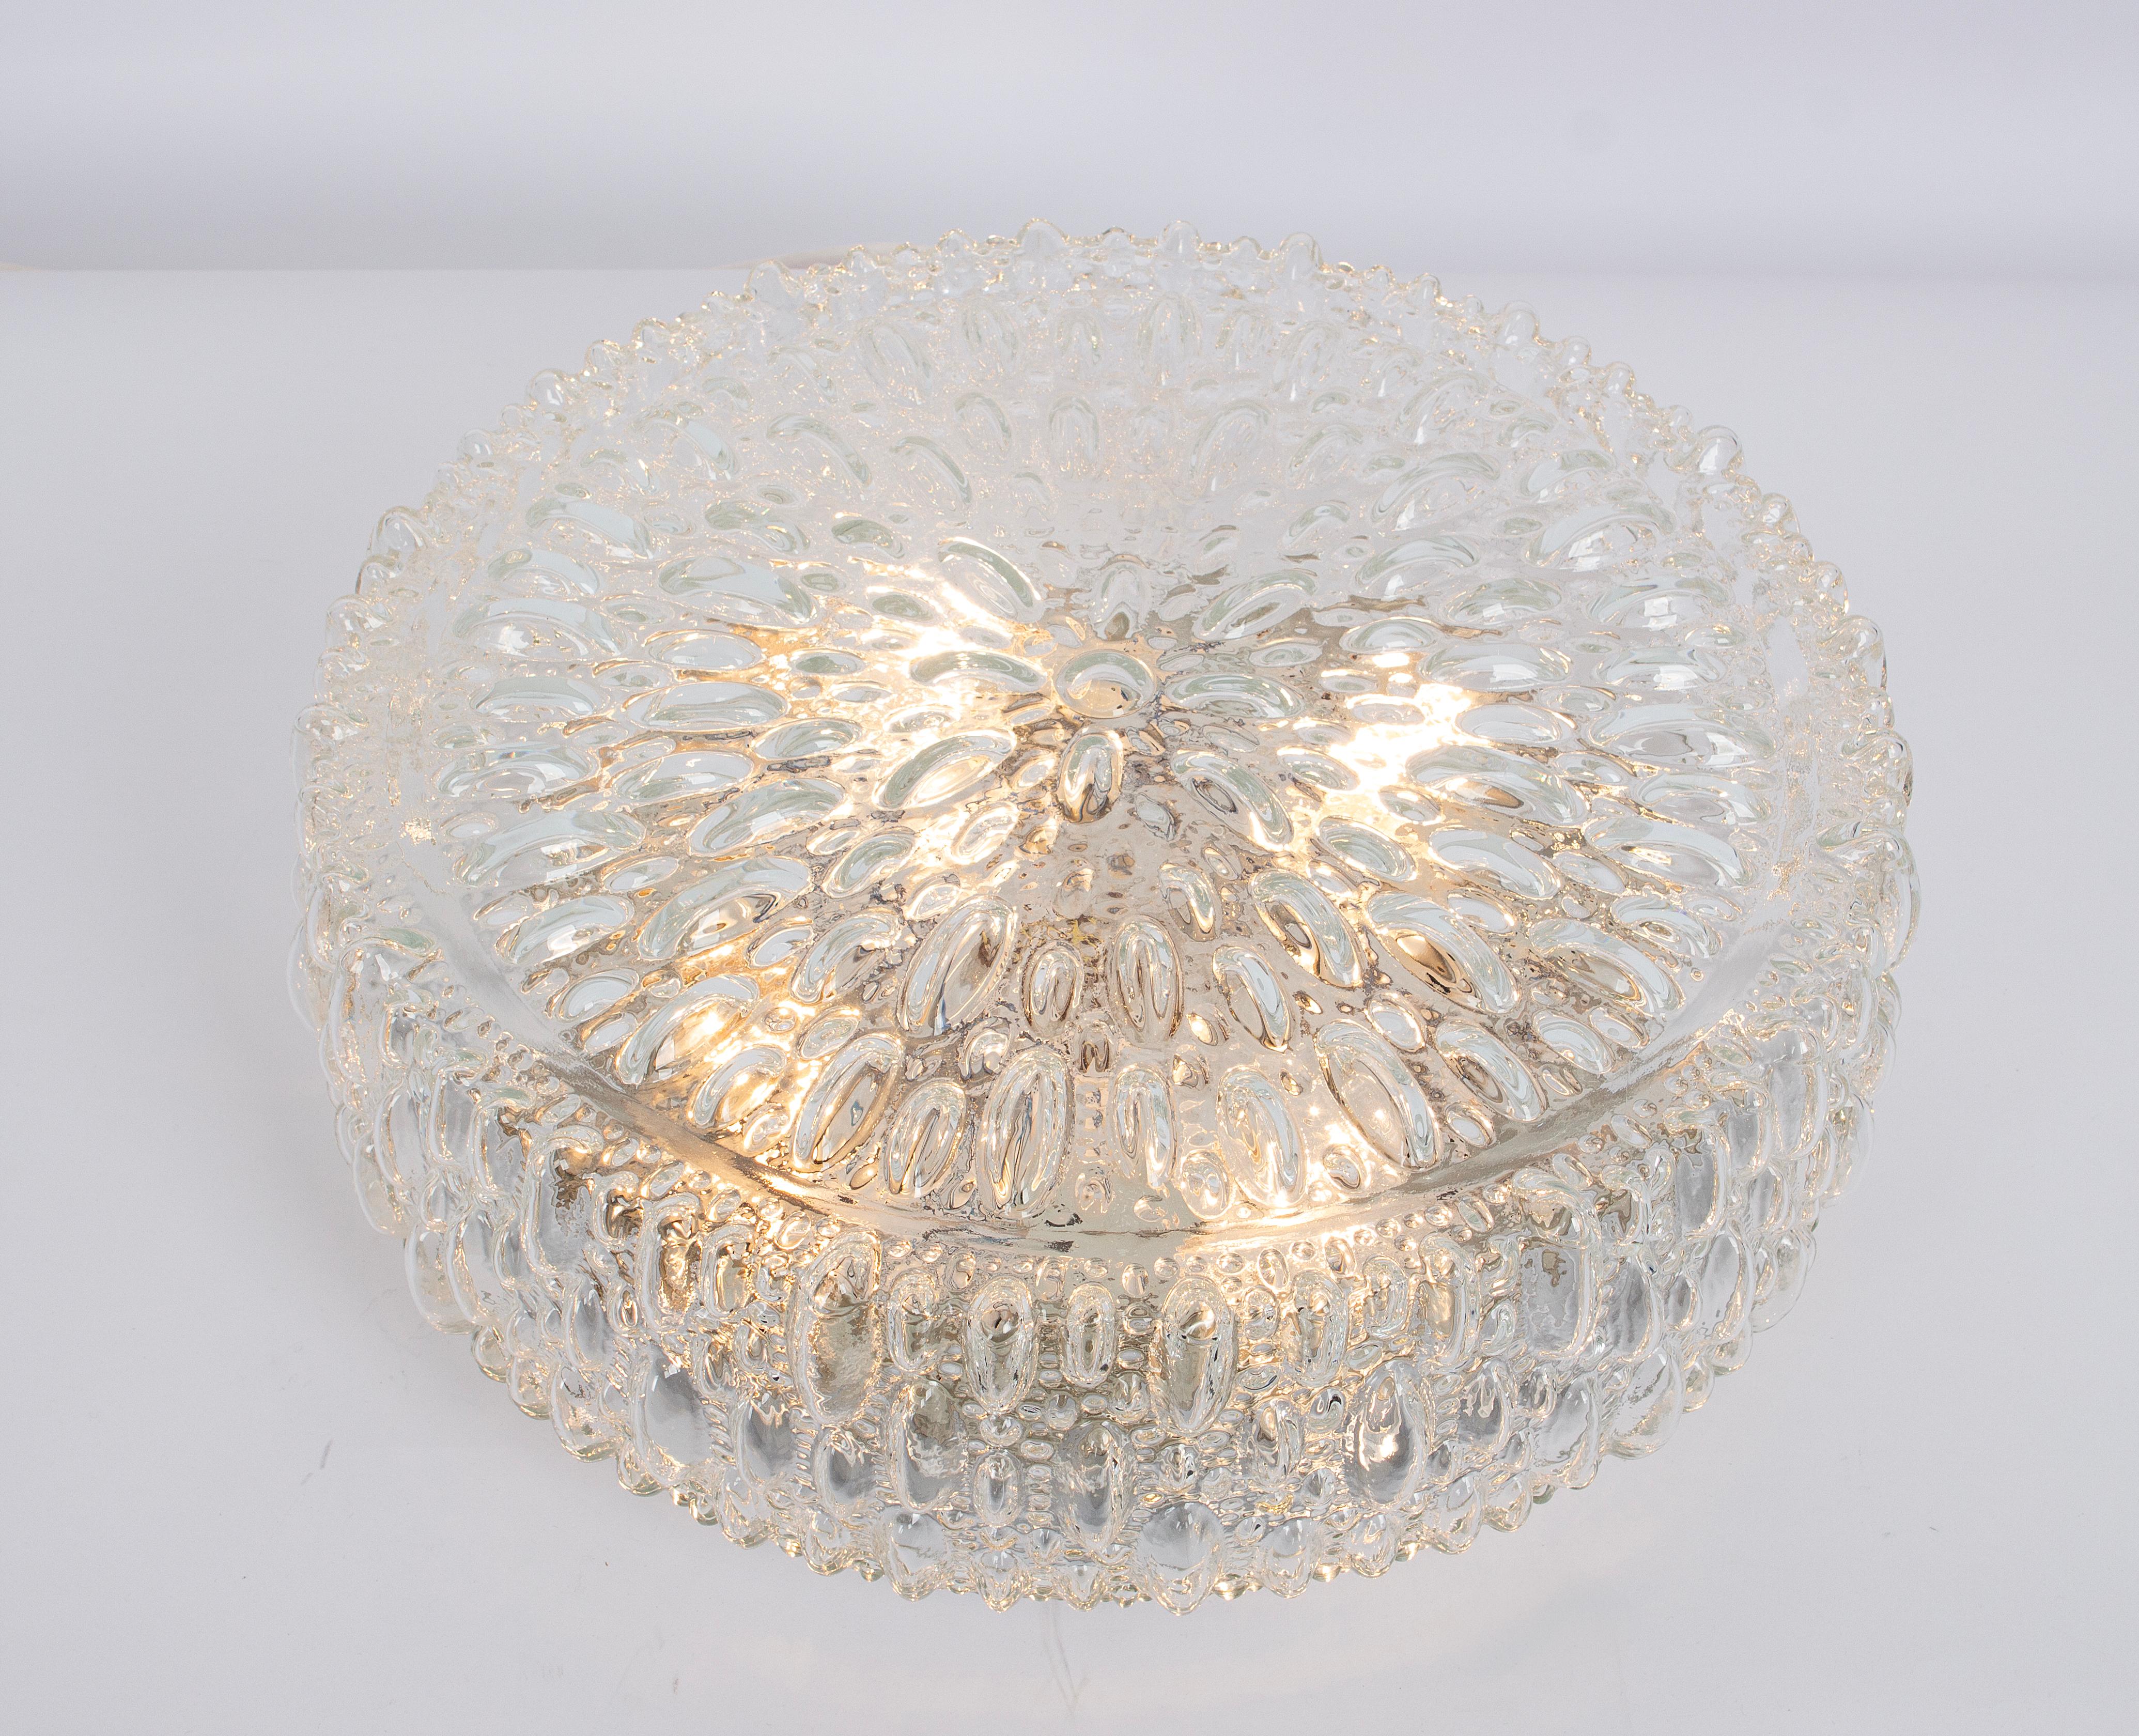 1 of 4 Large Round Textured Glass Flushmount by Limburg, Germany, 1970s For Sale 2